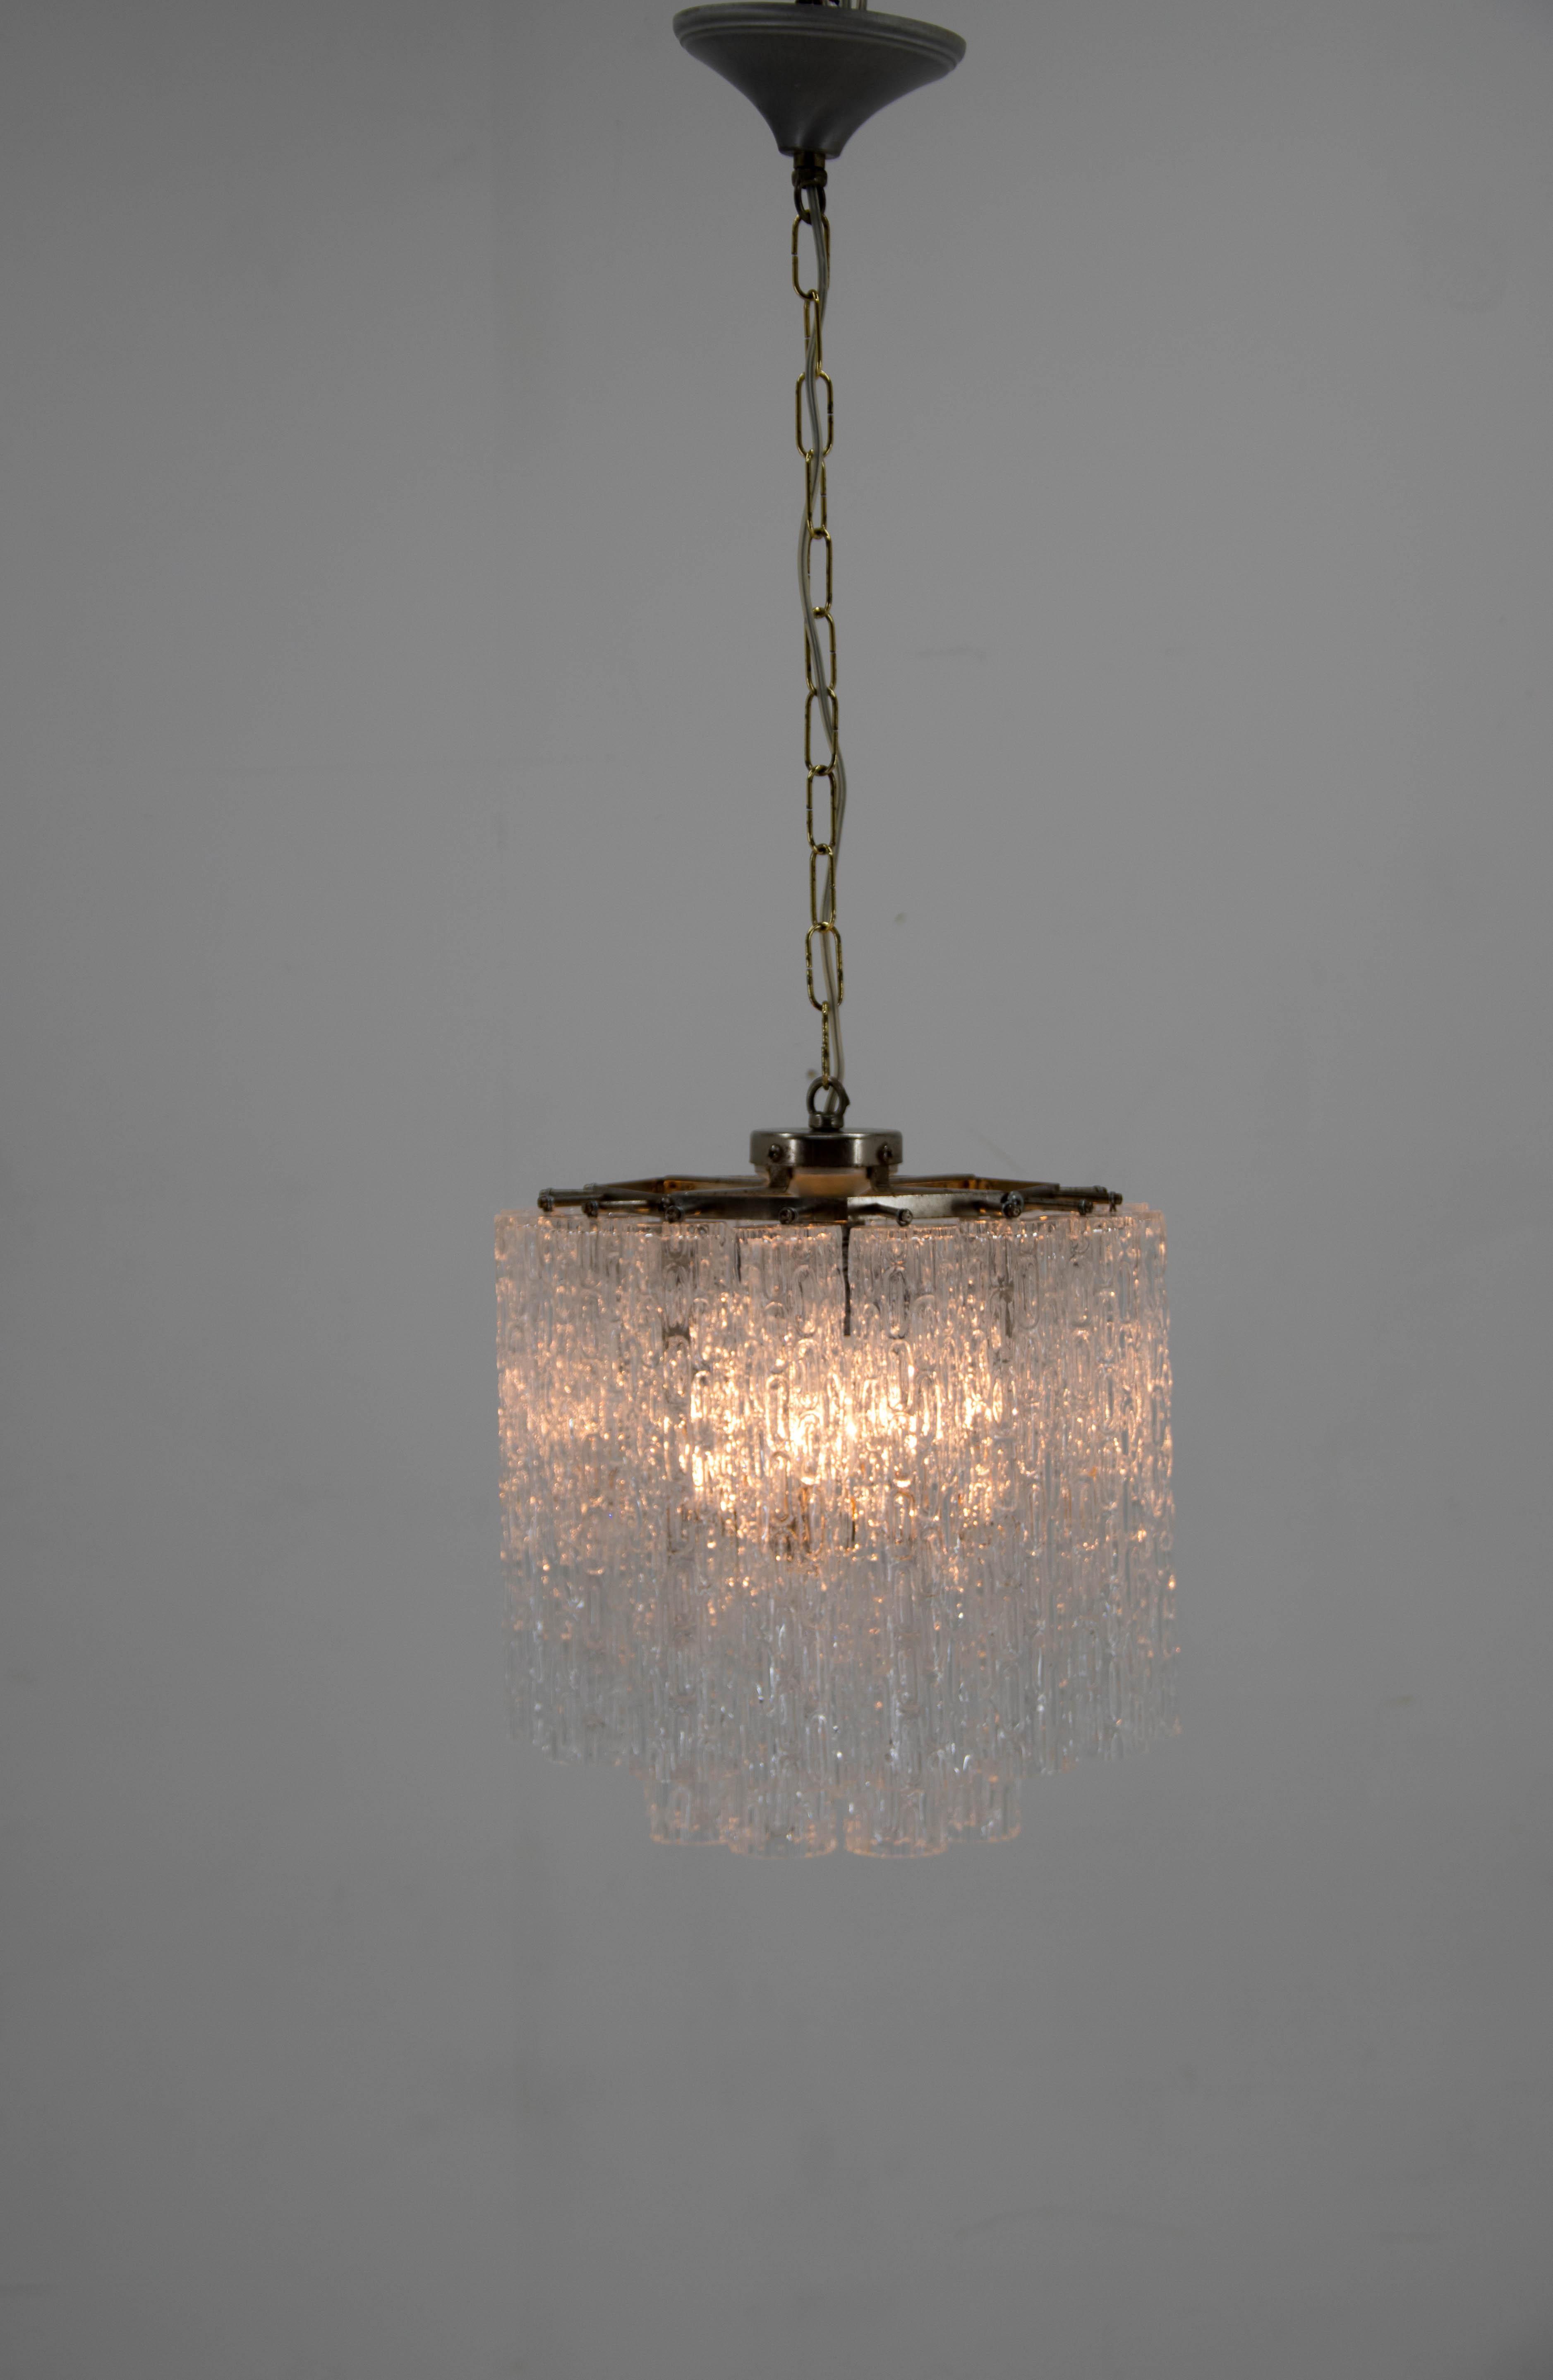 Crystal chandelier made in Italy in 1950.
Very good original condition.
1x100W, E25-E27 bulb
US wiring compatible